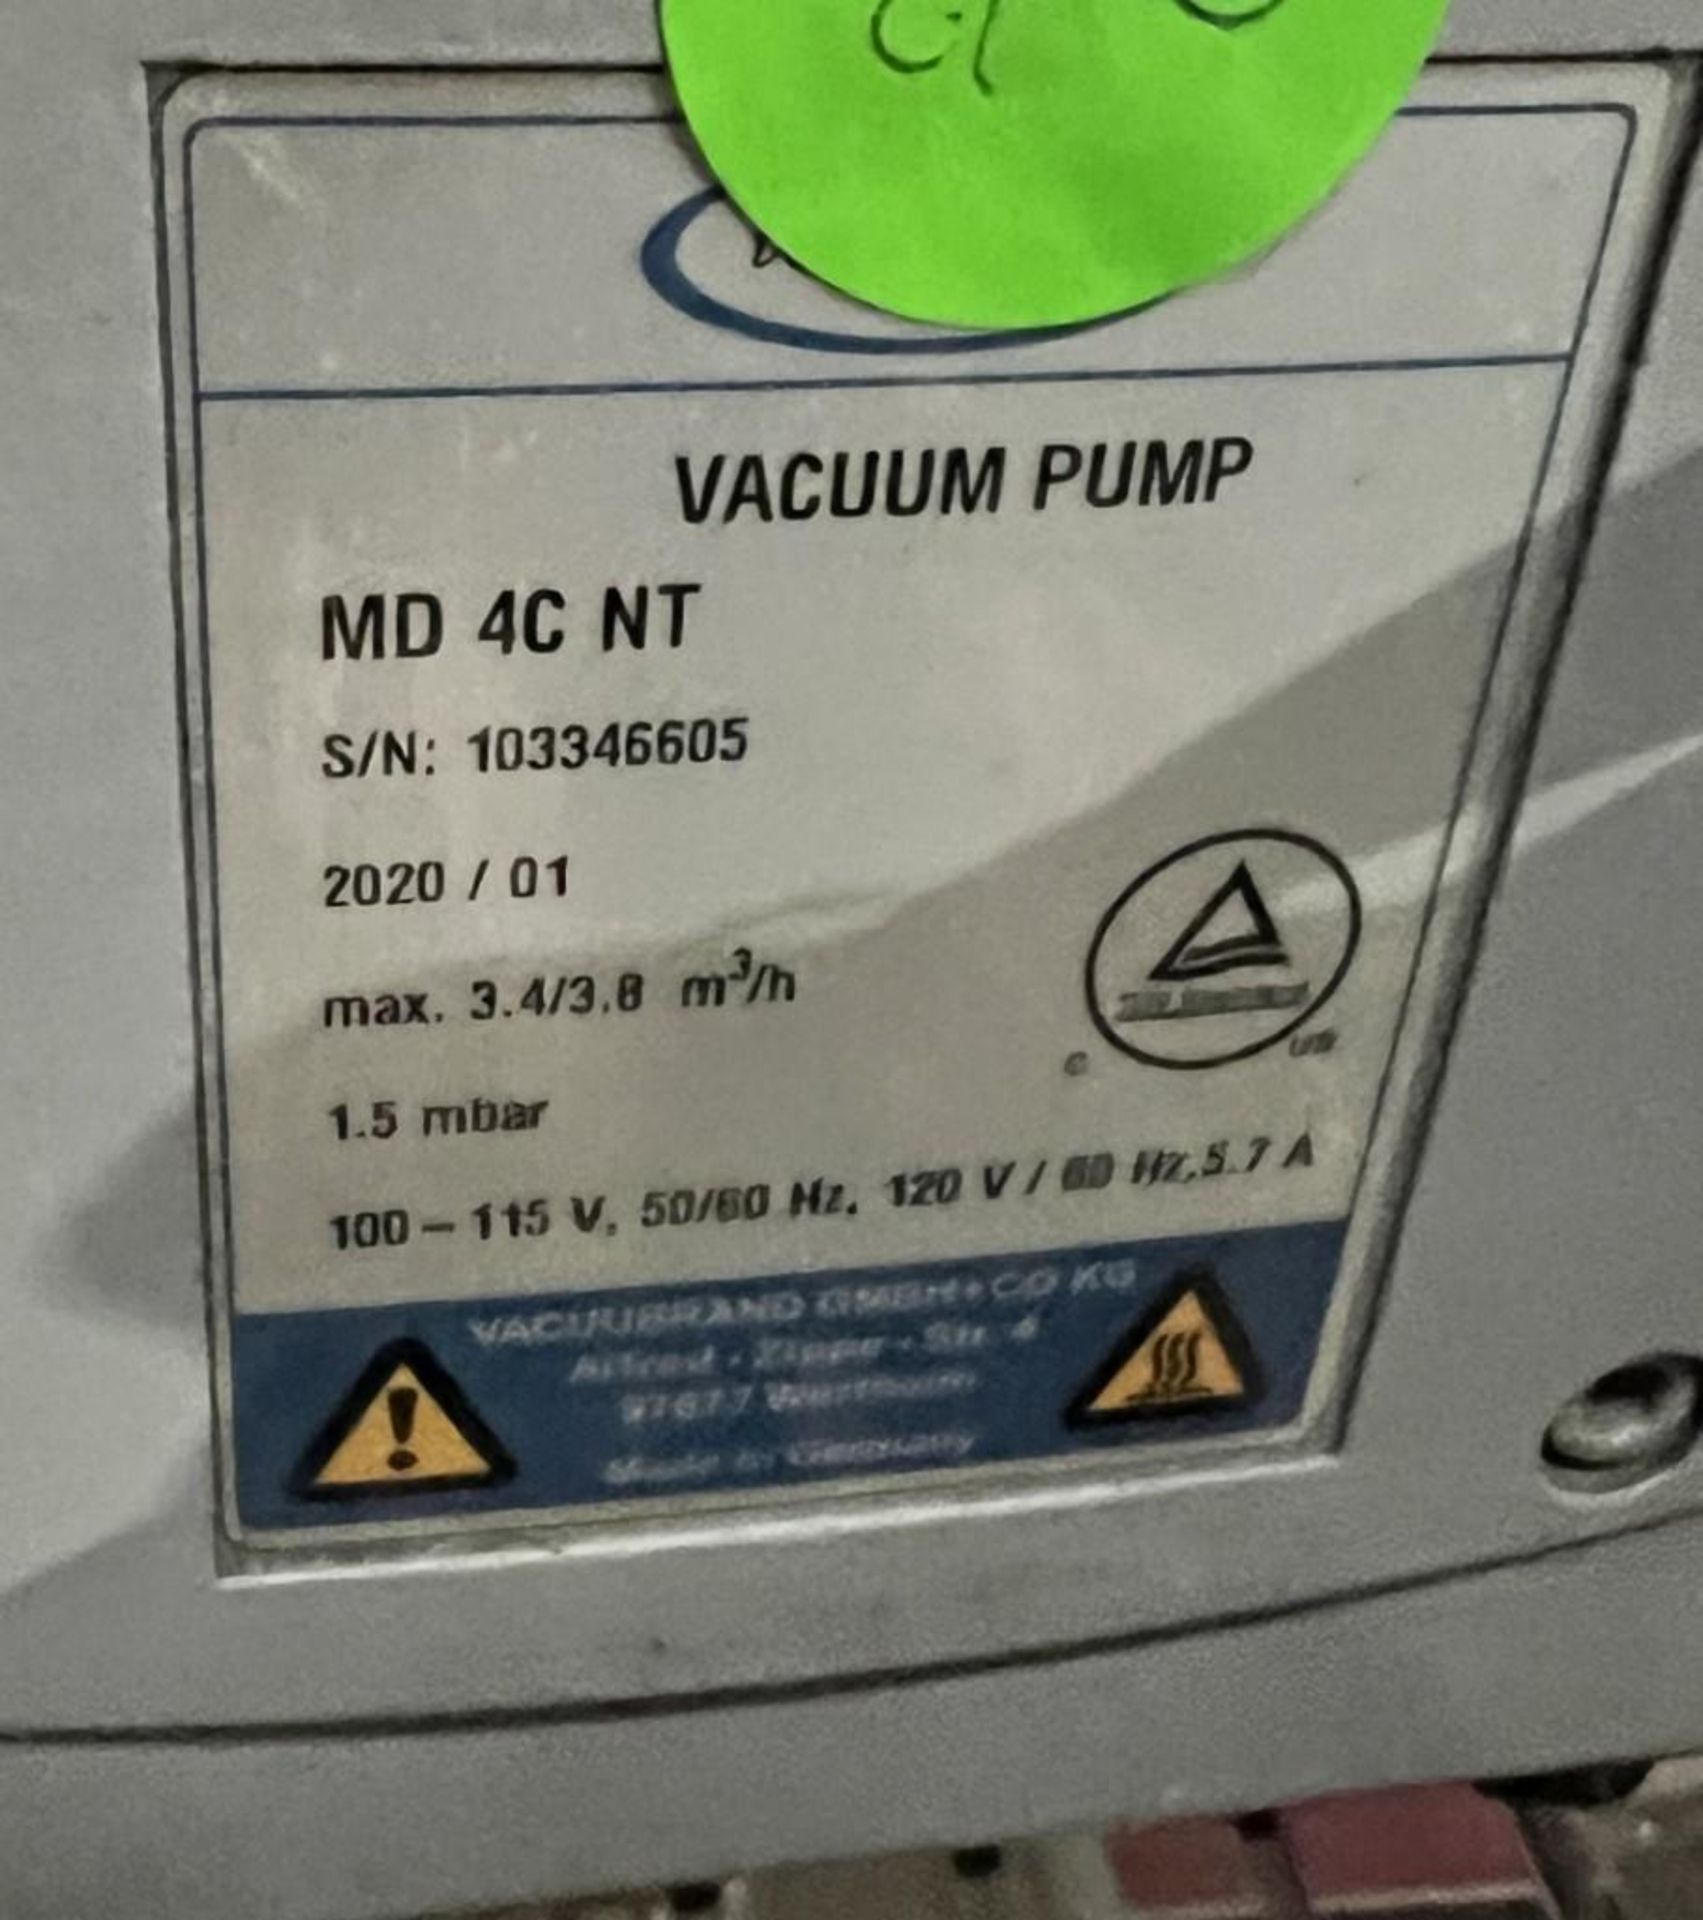 Lot Of (5) Vacuum Pumps. With (3) Vacuubrand model MD-4C-NT, Serial# 103261009, 103462312, 103346605 - Image 7 of 11